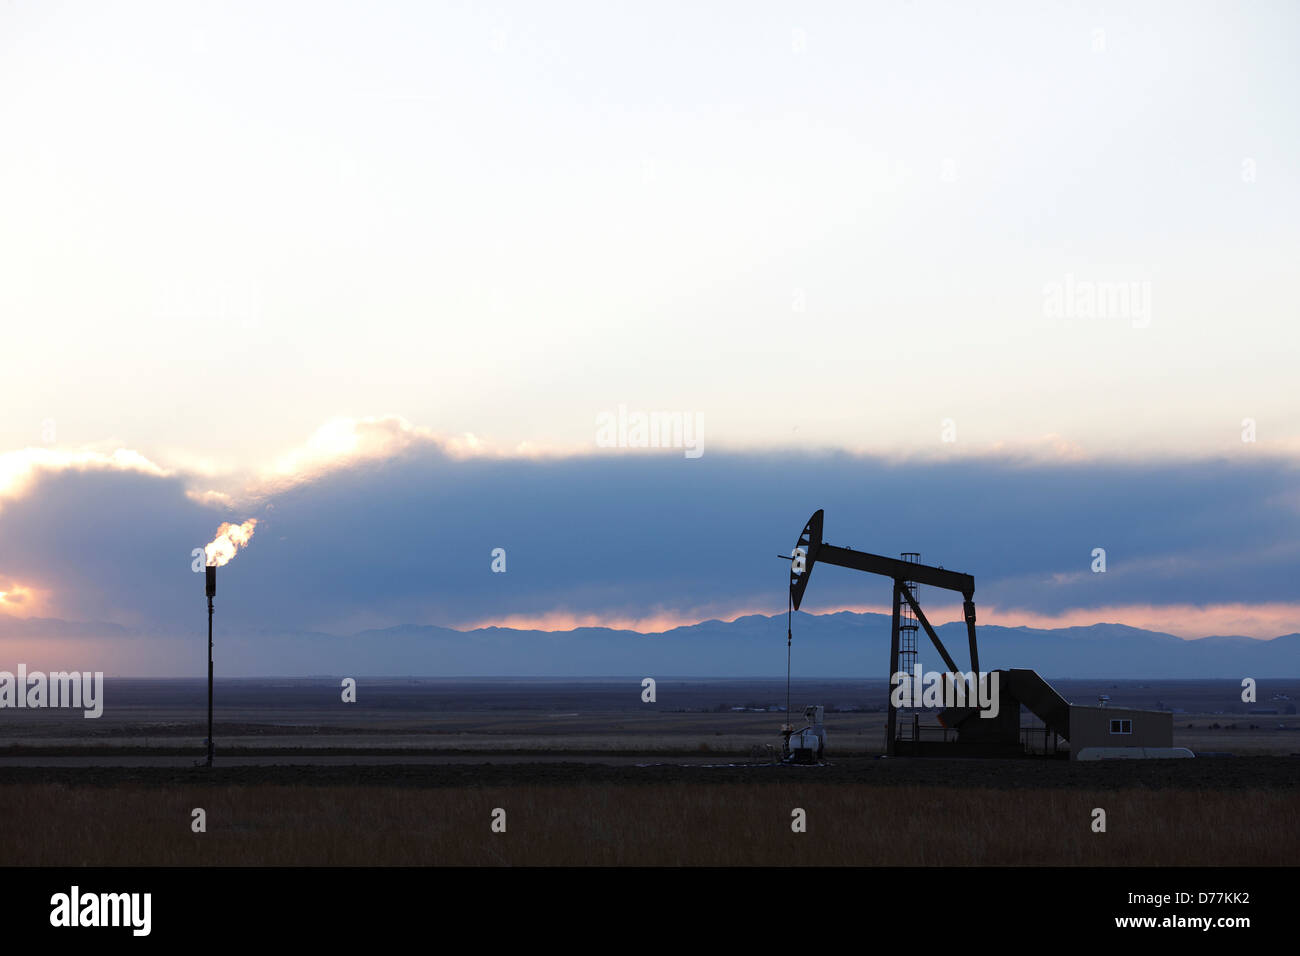 Oil well pumpjack pump jack gas flare flare stack at sunset eastern plains Colorado Rocky Mountains in distance. Stock Photo